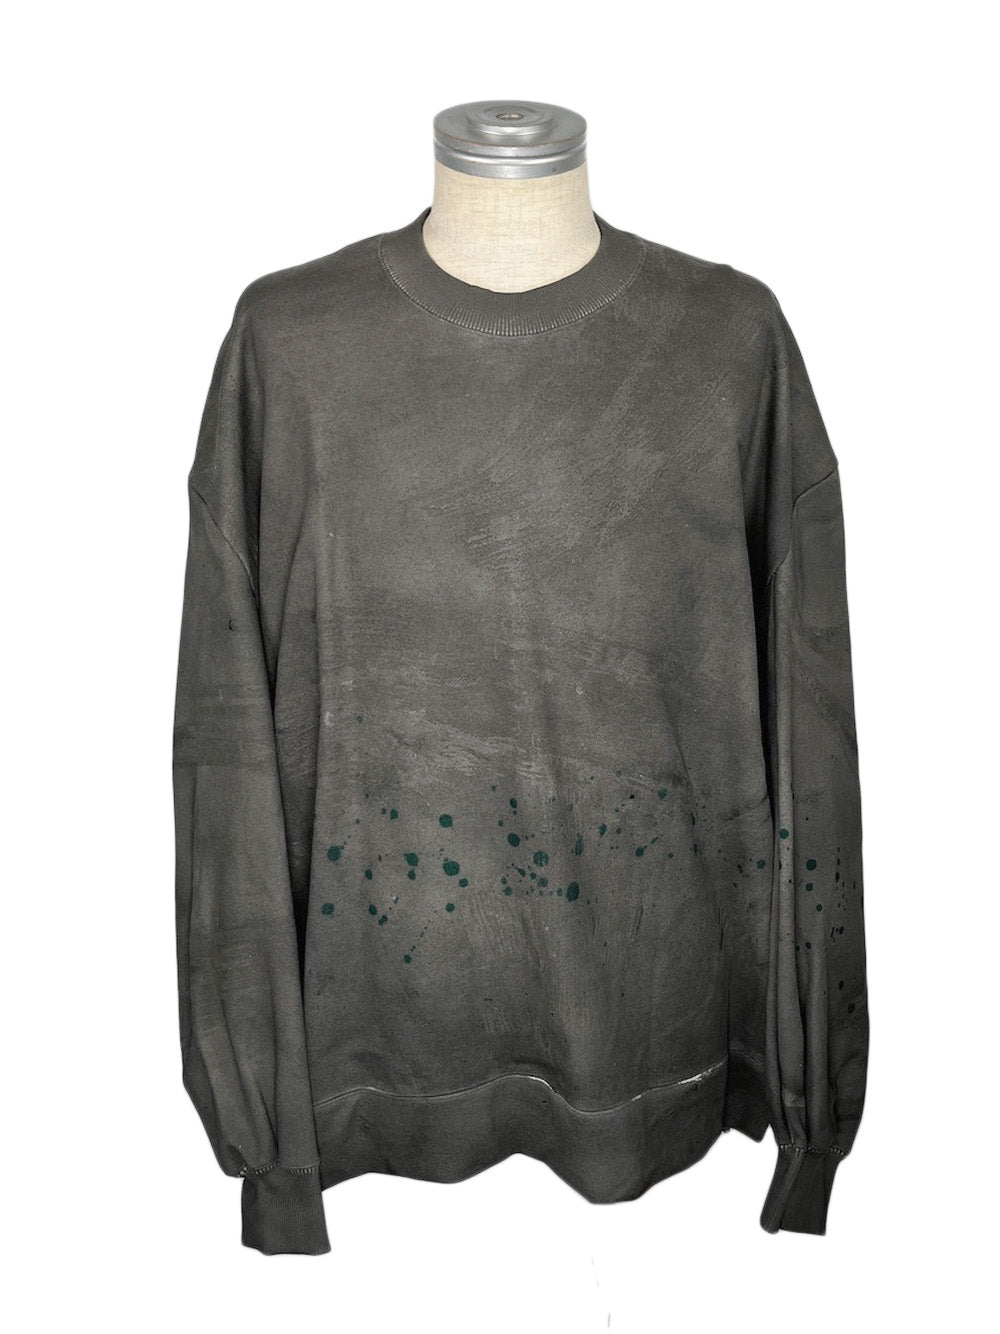 LB23AW-PO04-STC | 3D plaster style pigment pullover | IRON 